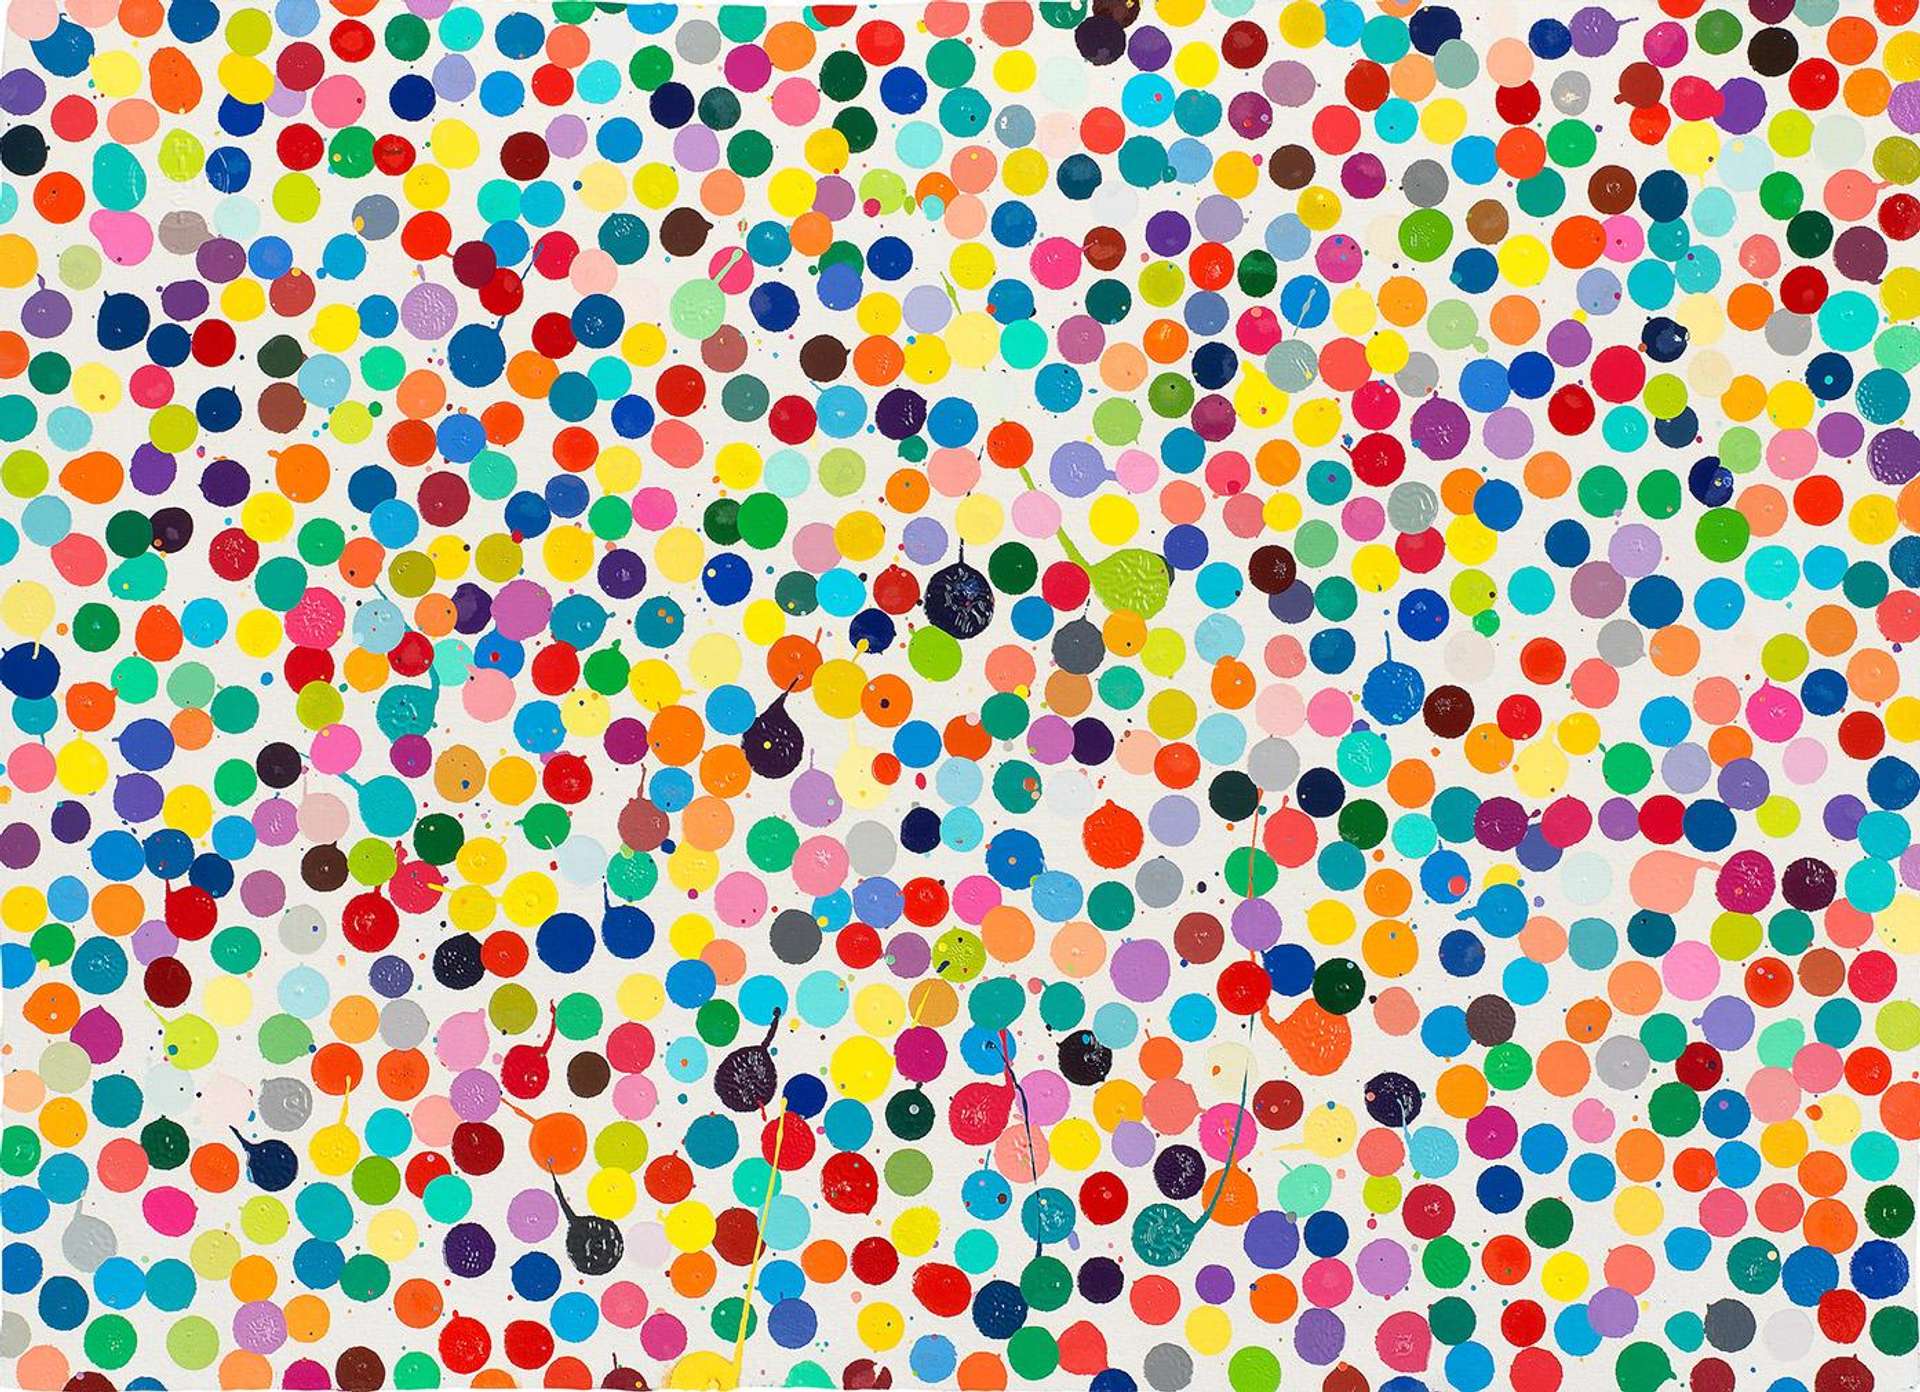 Small multi-coloured dots painted on a white background